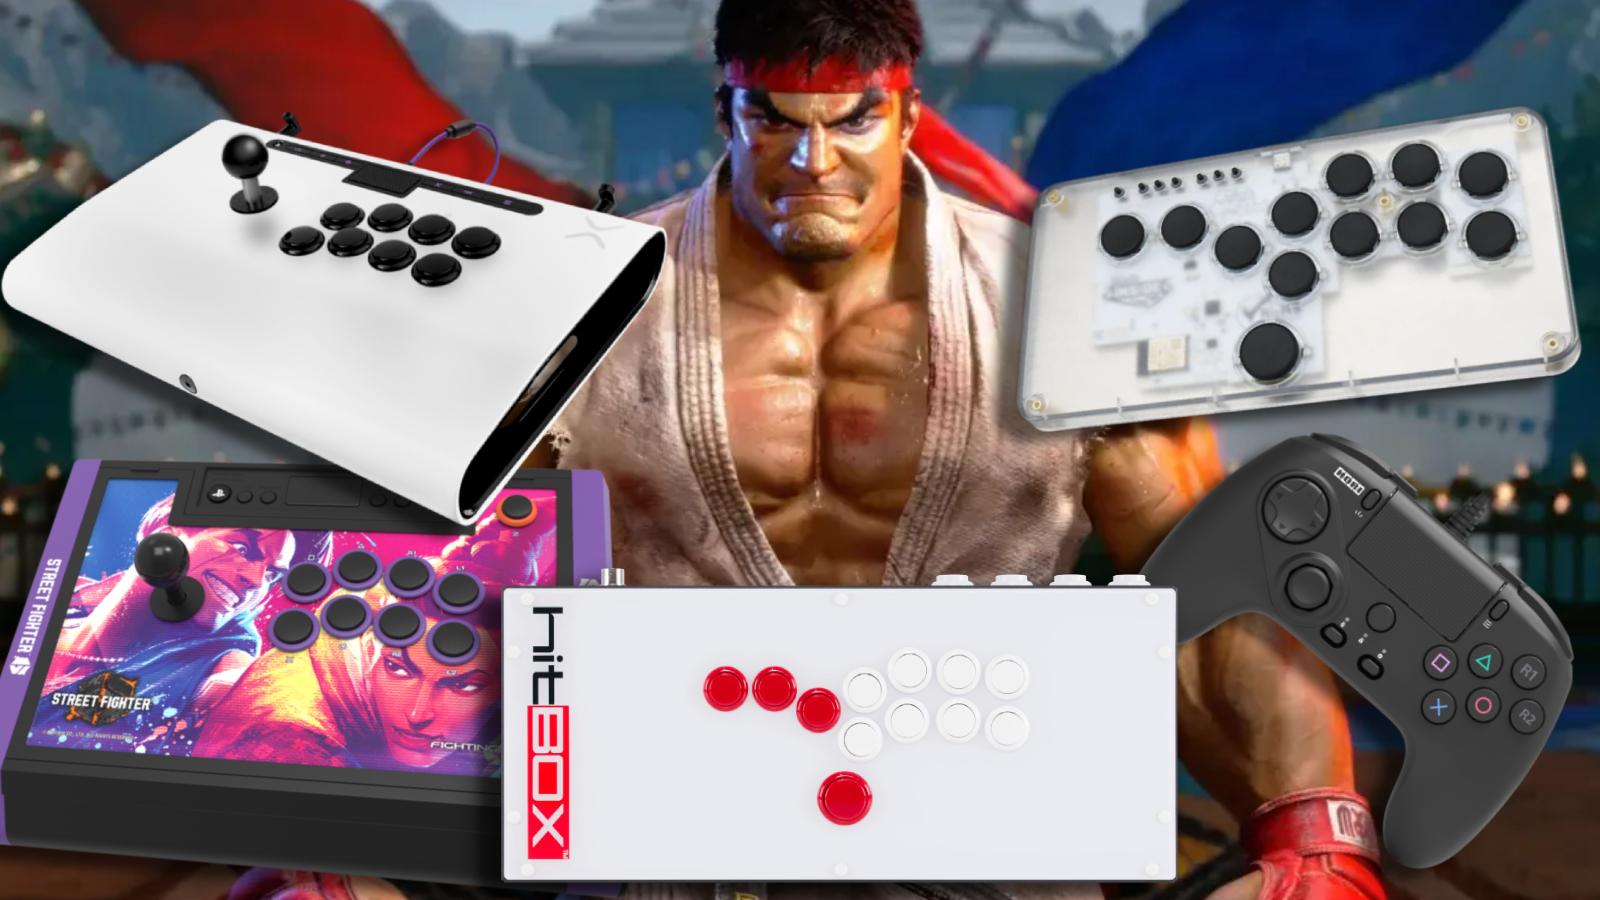 Ryu from Street Fighter surrounded by controllers